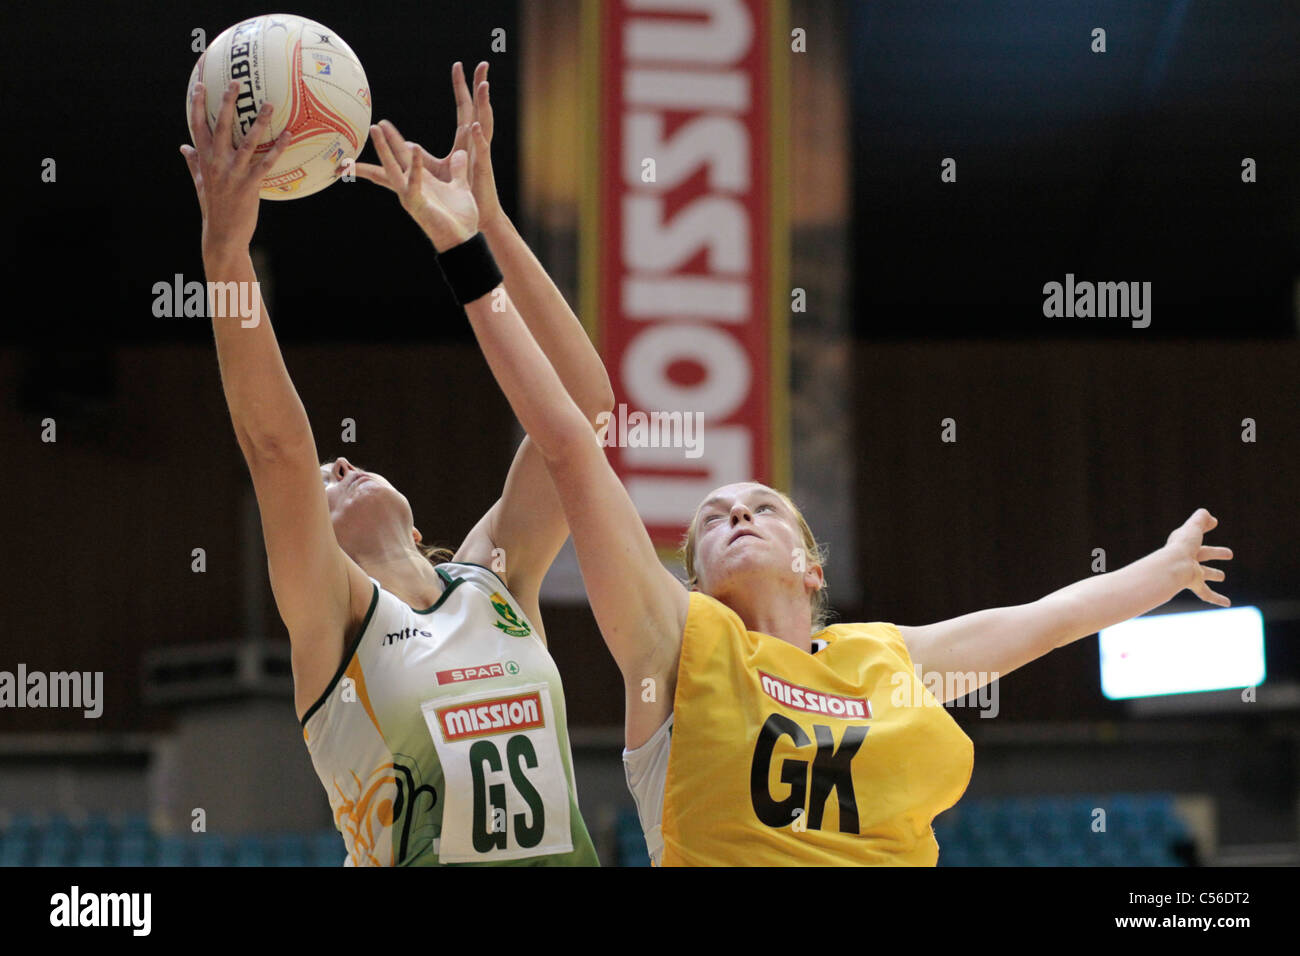 09.07.2011 Claudia Basson of South Africa(left) battles with Gemma Gibney for the ball during the 5-8 positioning between South Africa and Northern Ireland, Mission Foods World Netball Championships 2011 from the Singapore Indoor Stadium in Singapore. Stock Photo